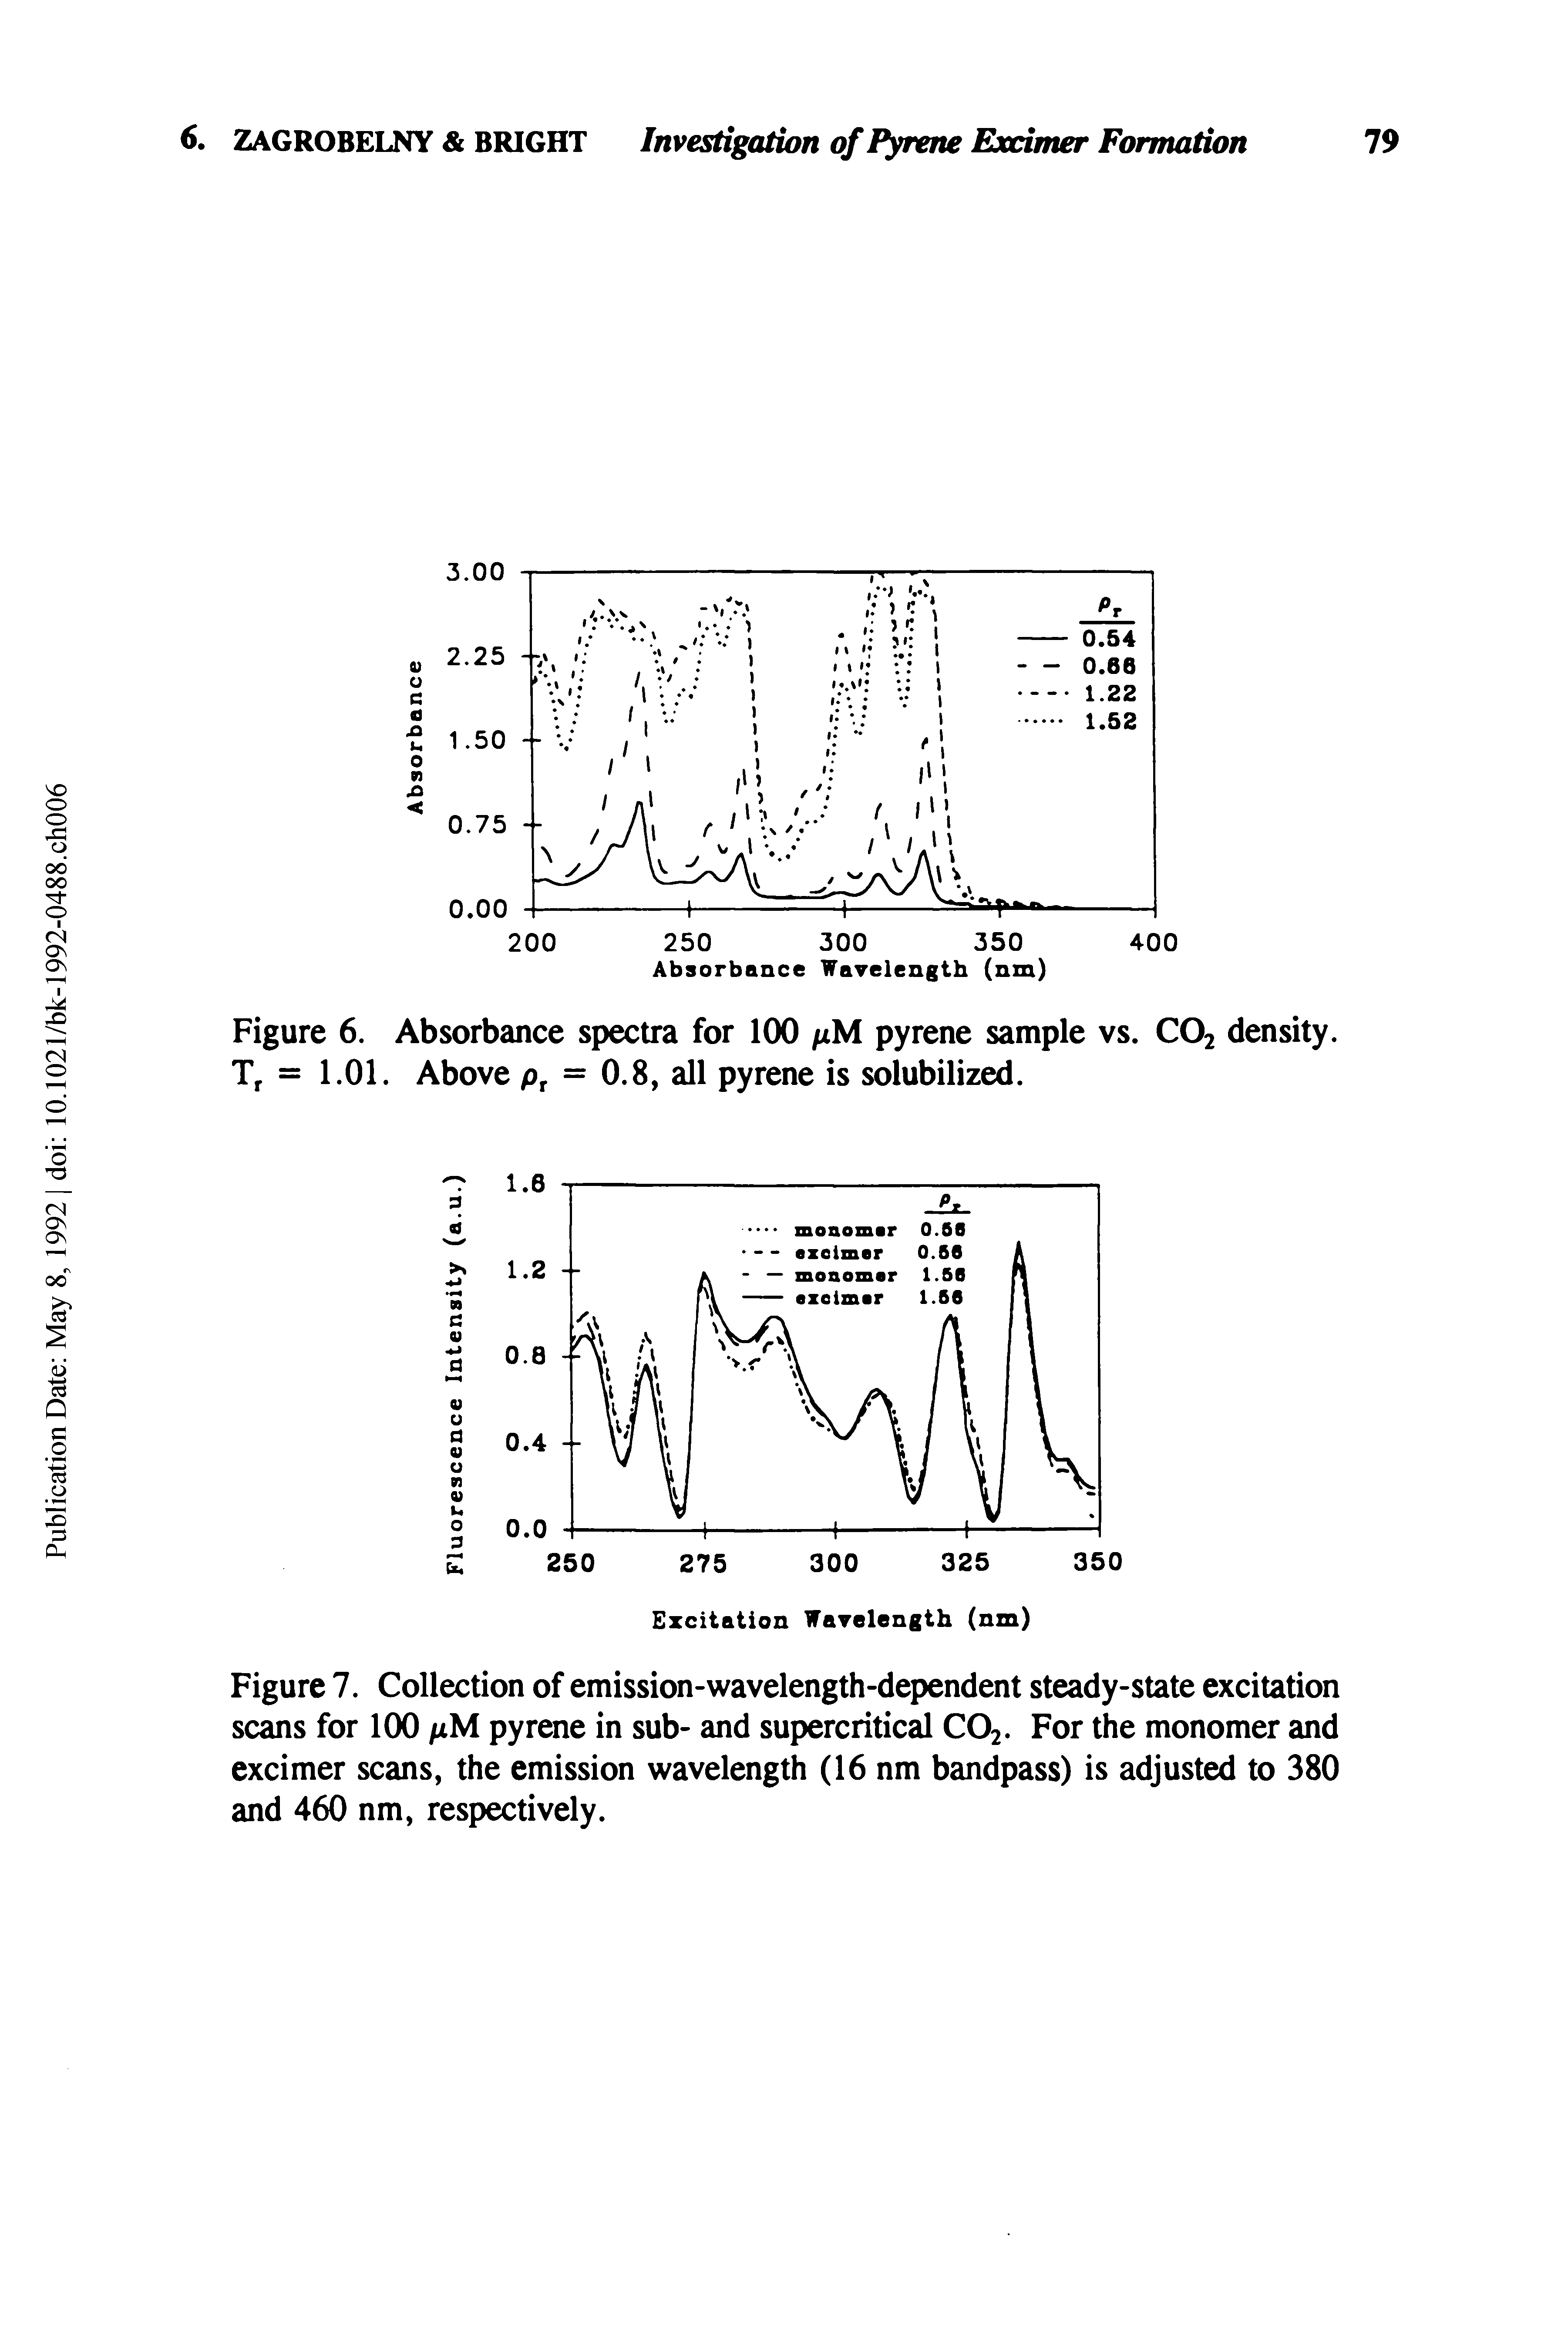 Figure 7. Collection of emission-wavelength-dependent steady-state excitation scans for 100 pM pyrene in sub- and supercritical C02. For the monomer and excimer scans, the emission wavelength (16 nm bandpass) is adjusted to 380 and 460 nm, respectively.